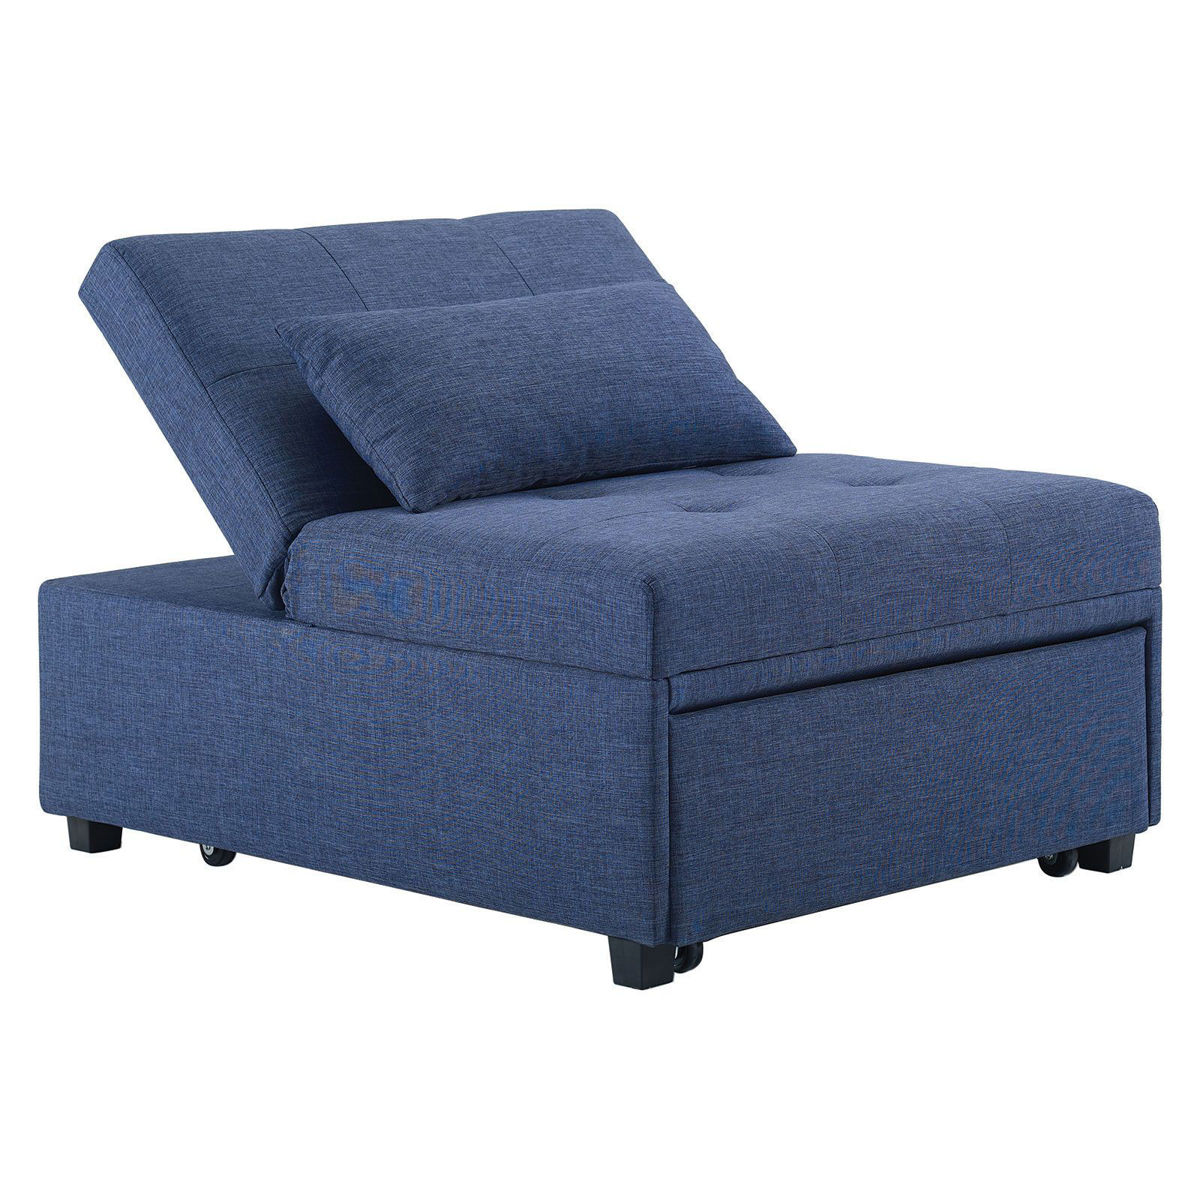 Picture of The Dozer Blue Chair Bed